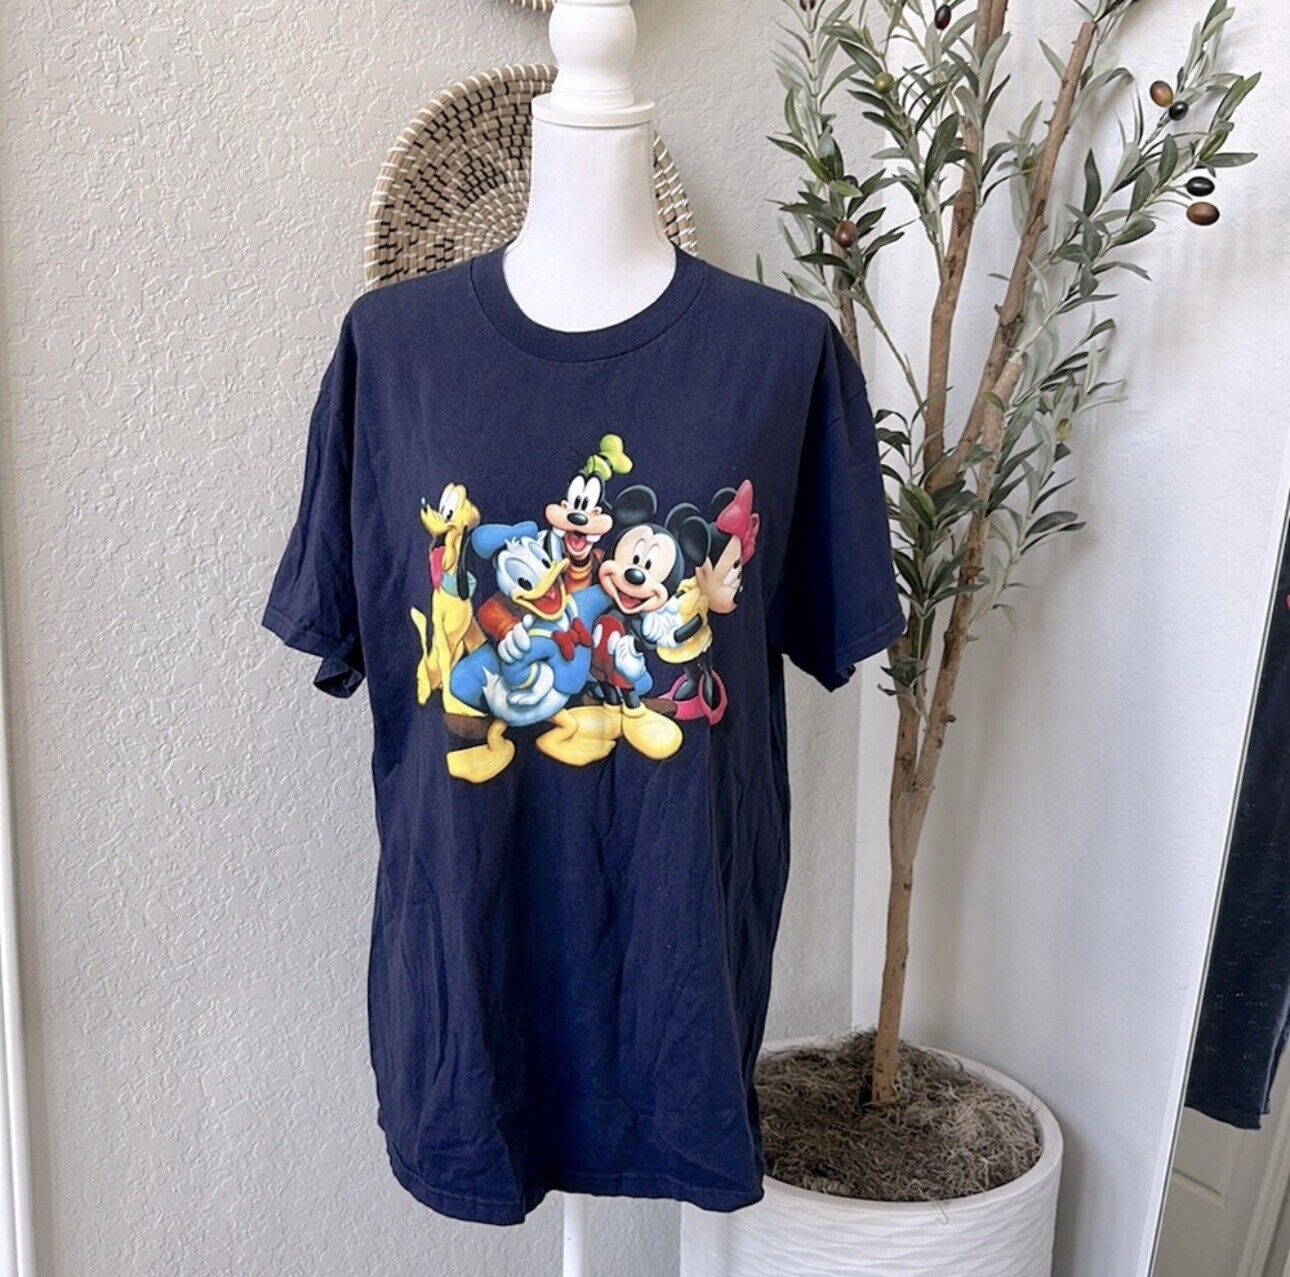 Disney’s Jerry Leigh Mickey & Friends 2007-2009 graphic Tee Vintage Adult Large